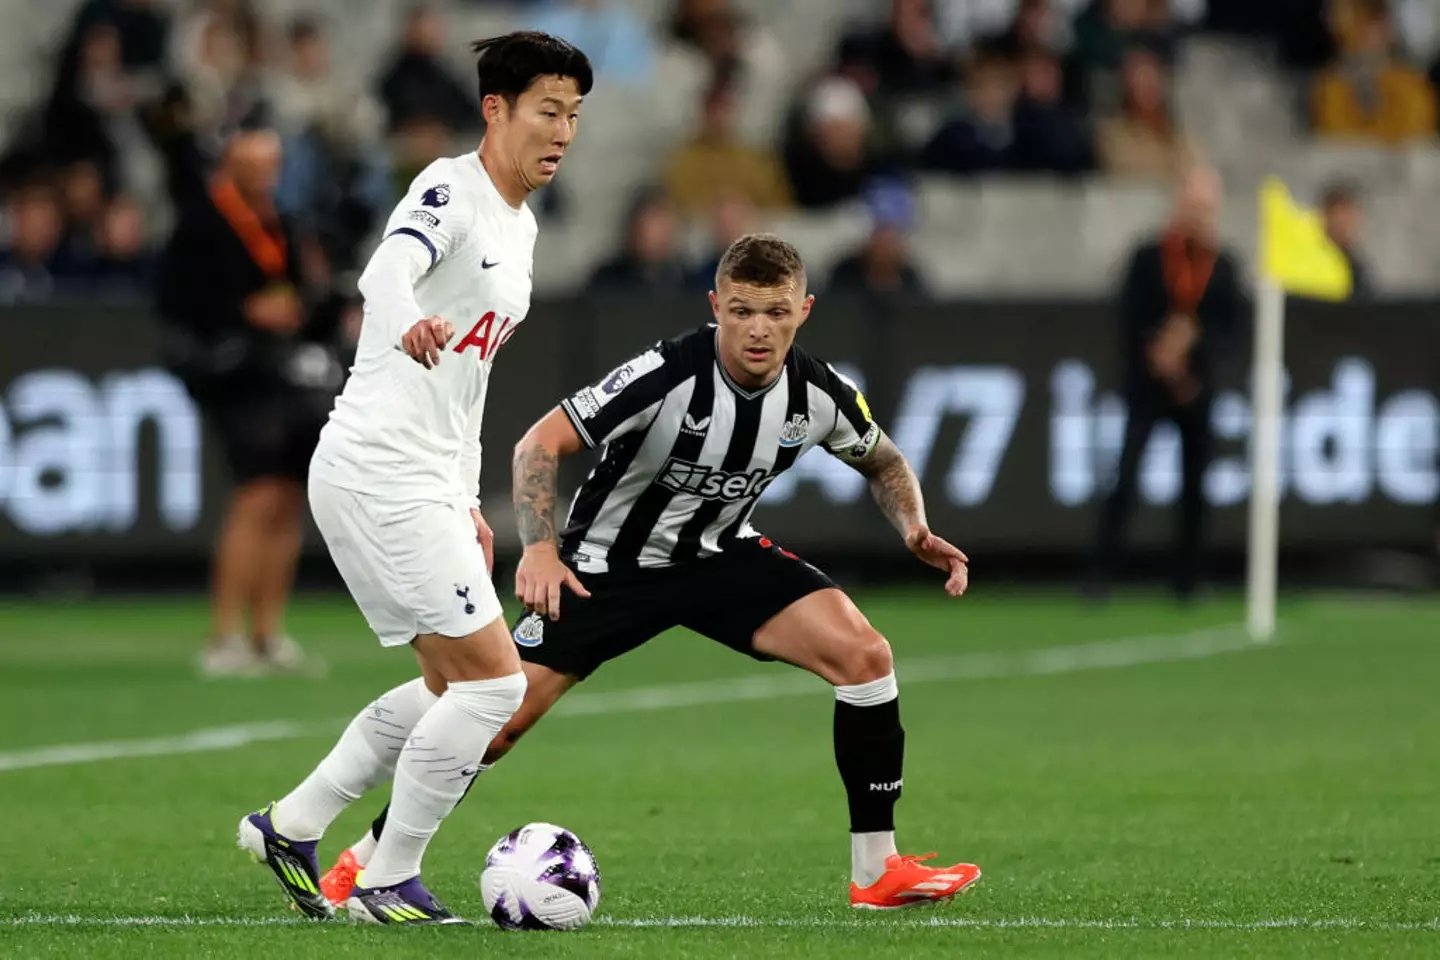 Son Heung-min and Kieran Trippier in action during the Newcastle vs Tottenham friendly at the Melbourne Cricket Ground (